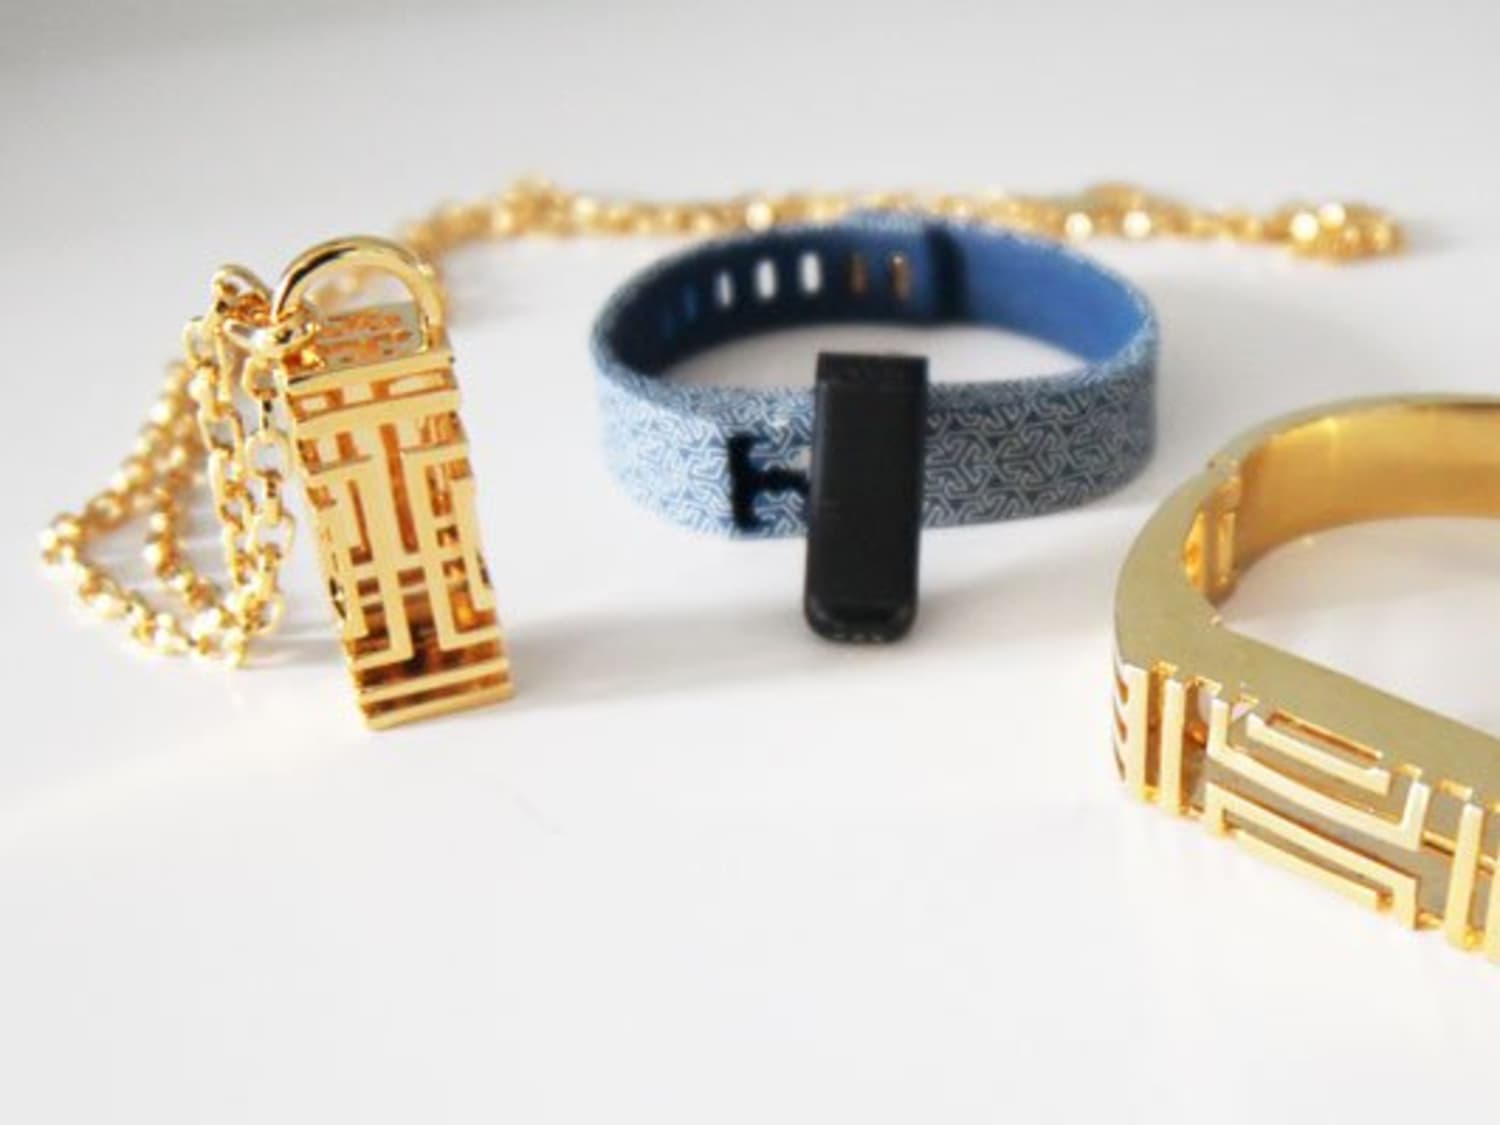 Tory Burch for FitBit | Apartment Therapy